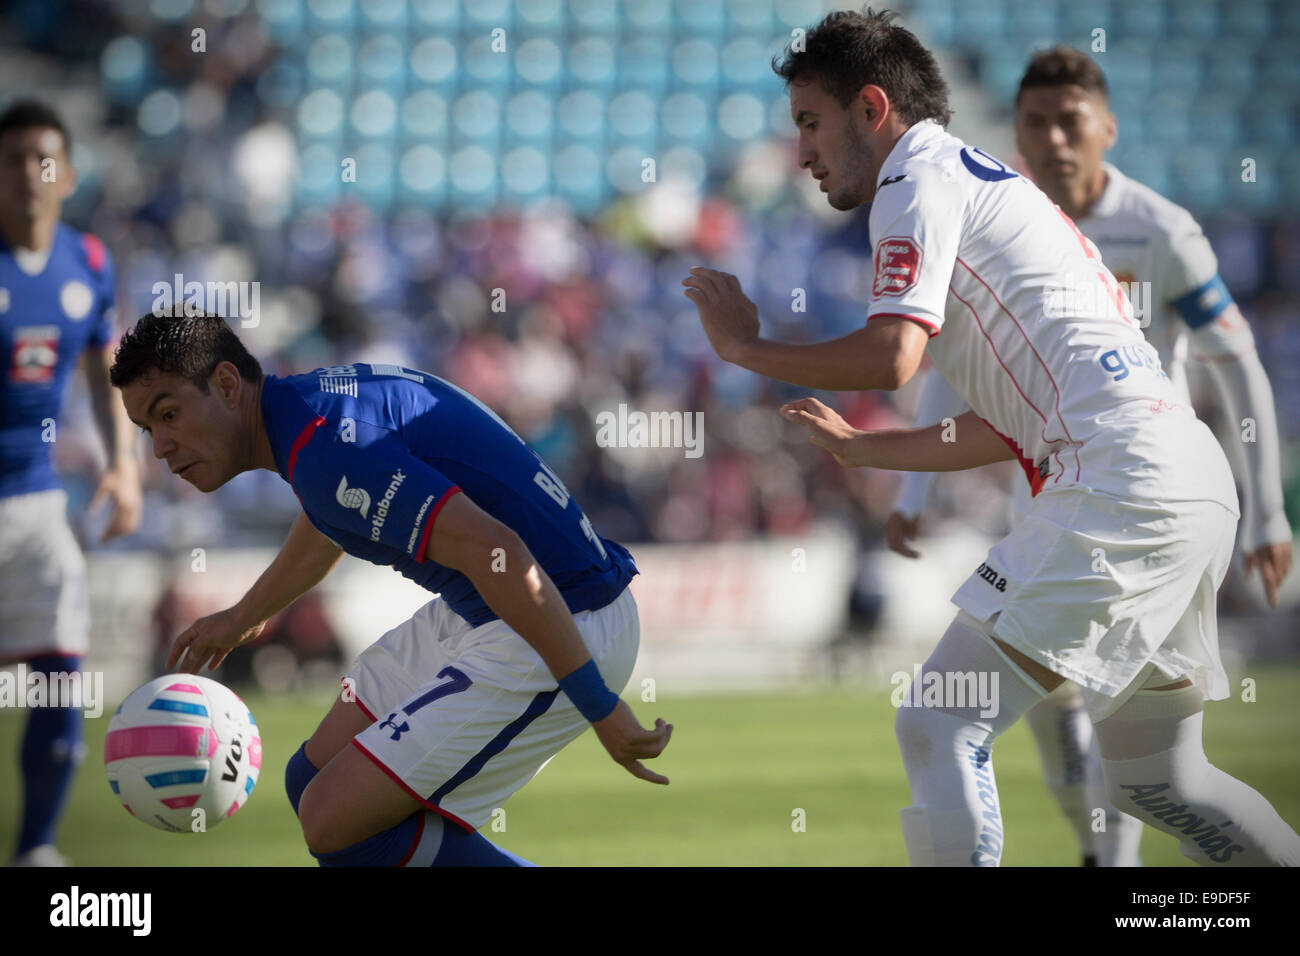 Mexico City, Mexico. 25th Oct, 2014. Cruz Azul's Pablo Barrera (L) vies for the ball with Carlos Guzman of Morelia during their match of the MX League Opening Tournament at Azul Stadium in Mexico City, capital of Mexico, on Oct. 25, 2014. Credit:  Alejandro Ayala/Xinhua/Alamy Live News Stock Photo